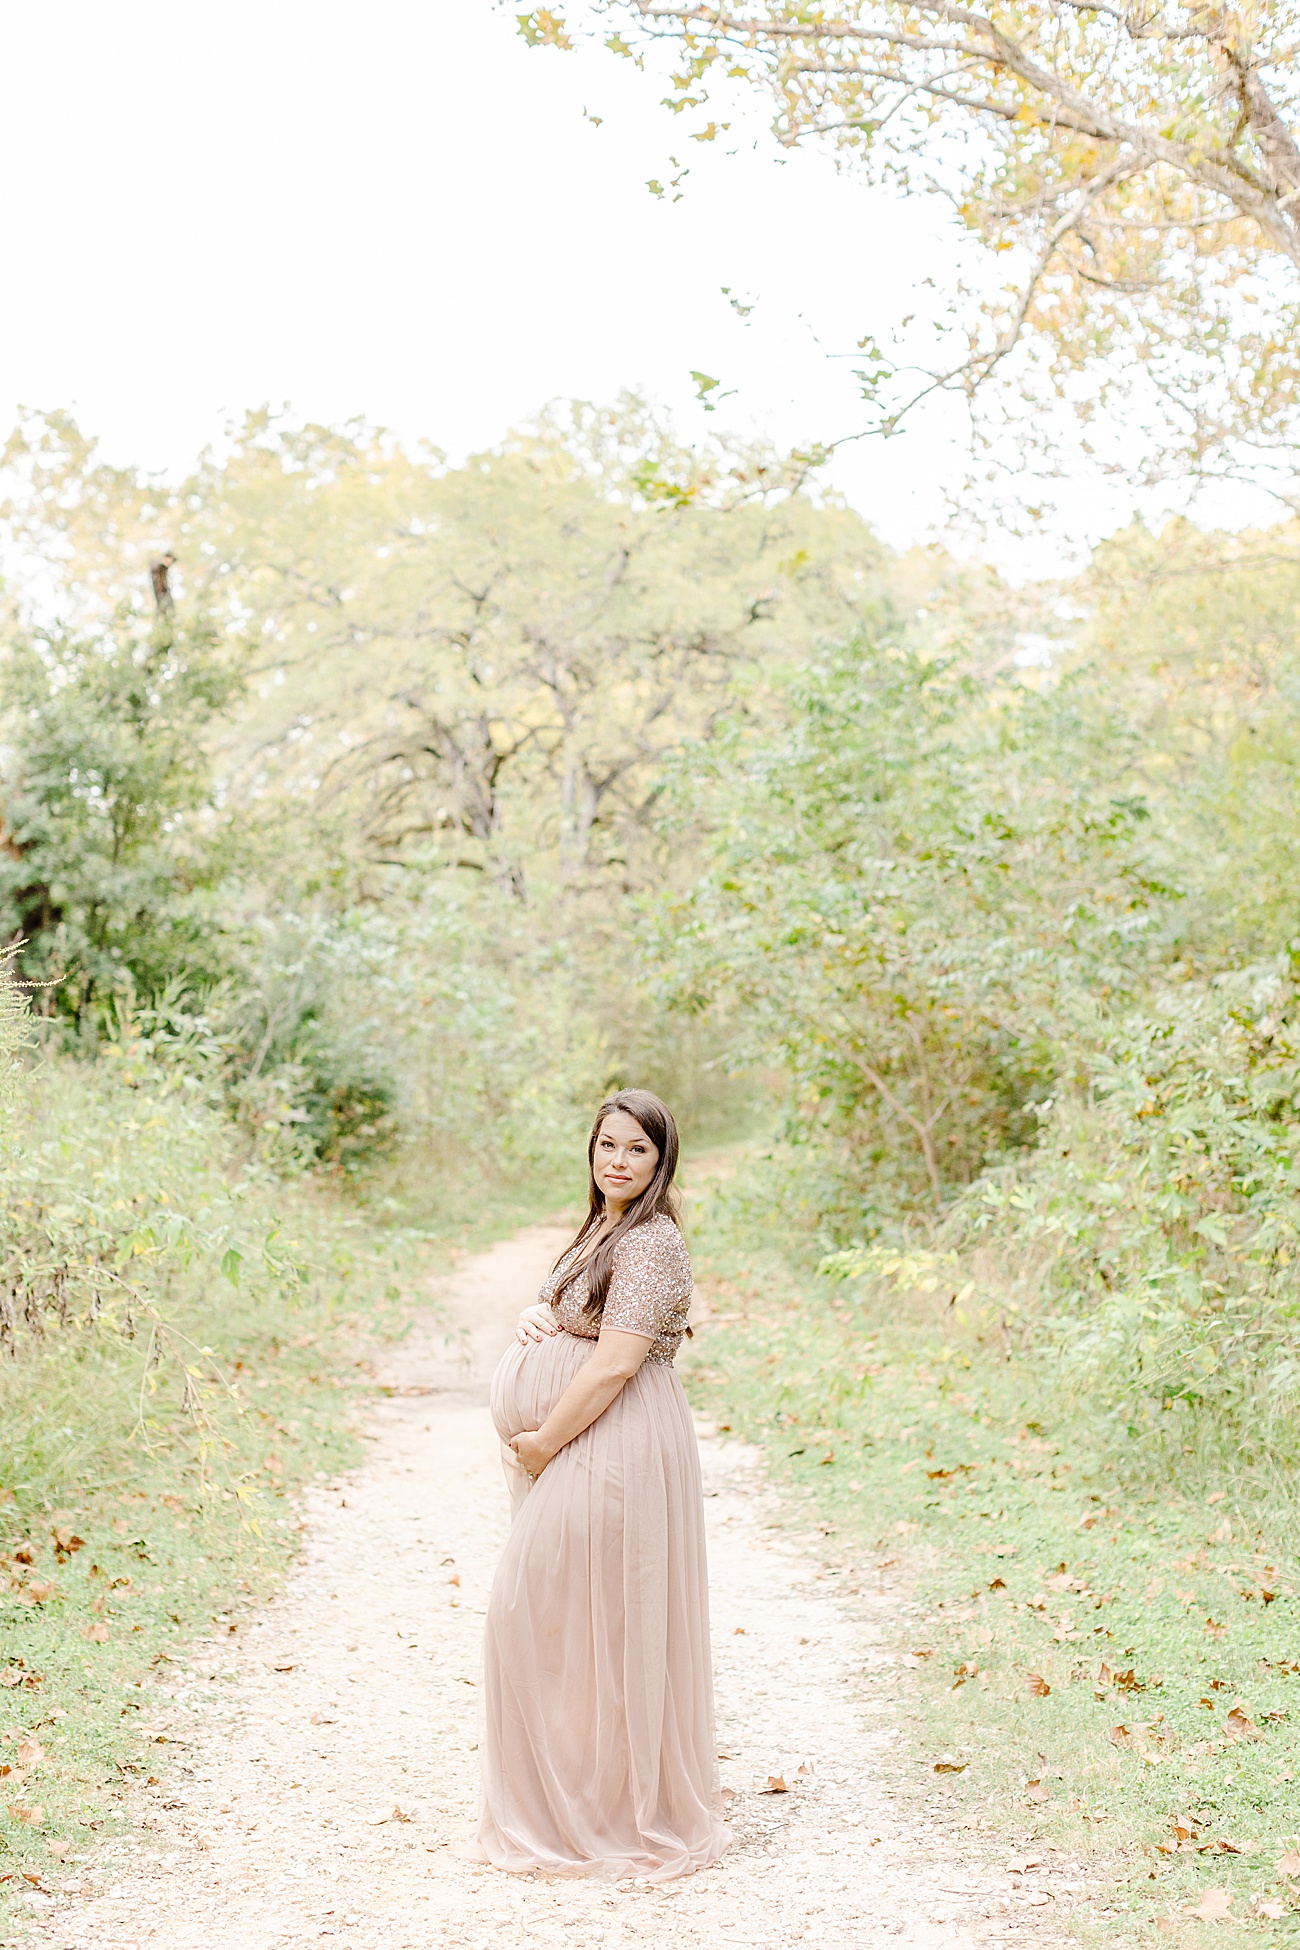 Maternity image in Austin, TX field by Sana Ahmed Photography